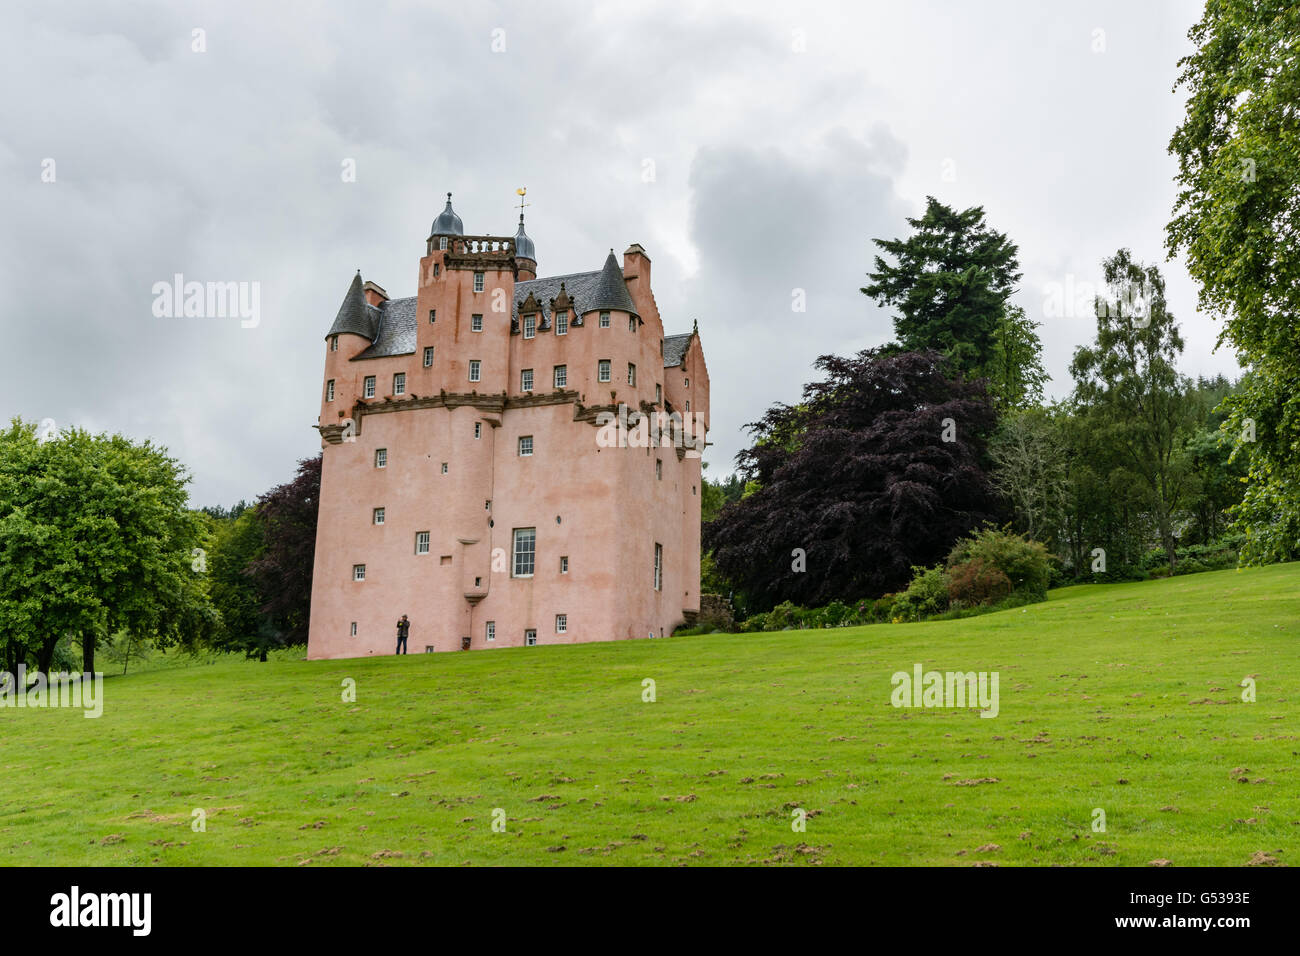 United Kingdom, Scotland, Aberdeenshire, Craigievar Castle, beginnings in the 16th century on the northern shores of the Scottish River Dee Stock Photo